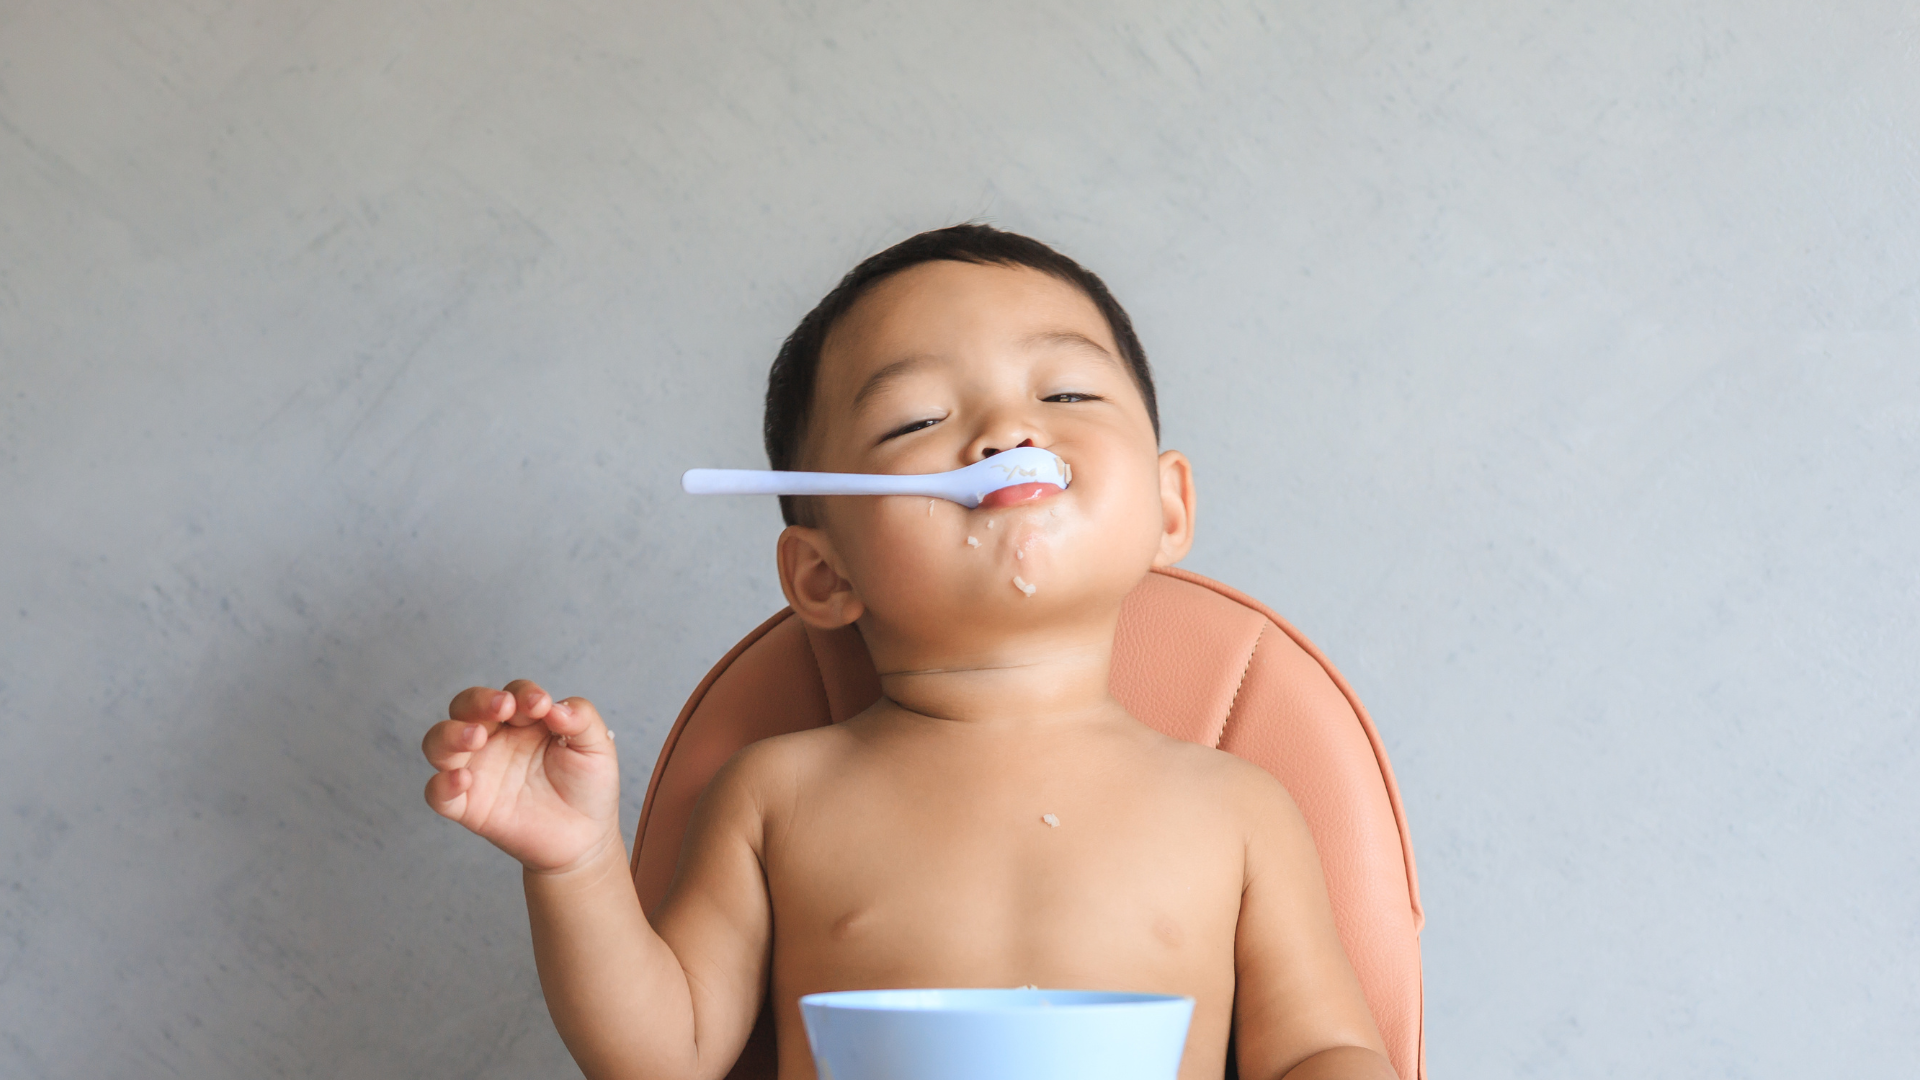 The Essentials of Complementary Feeding Practices for Babies